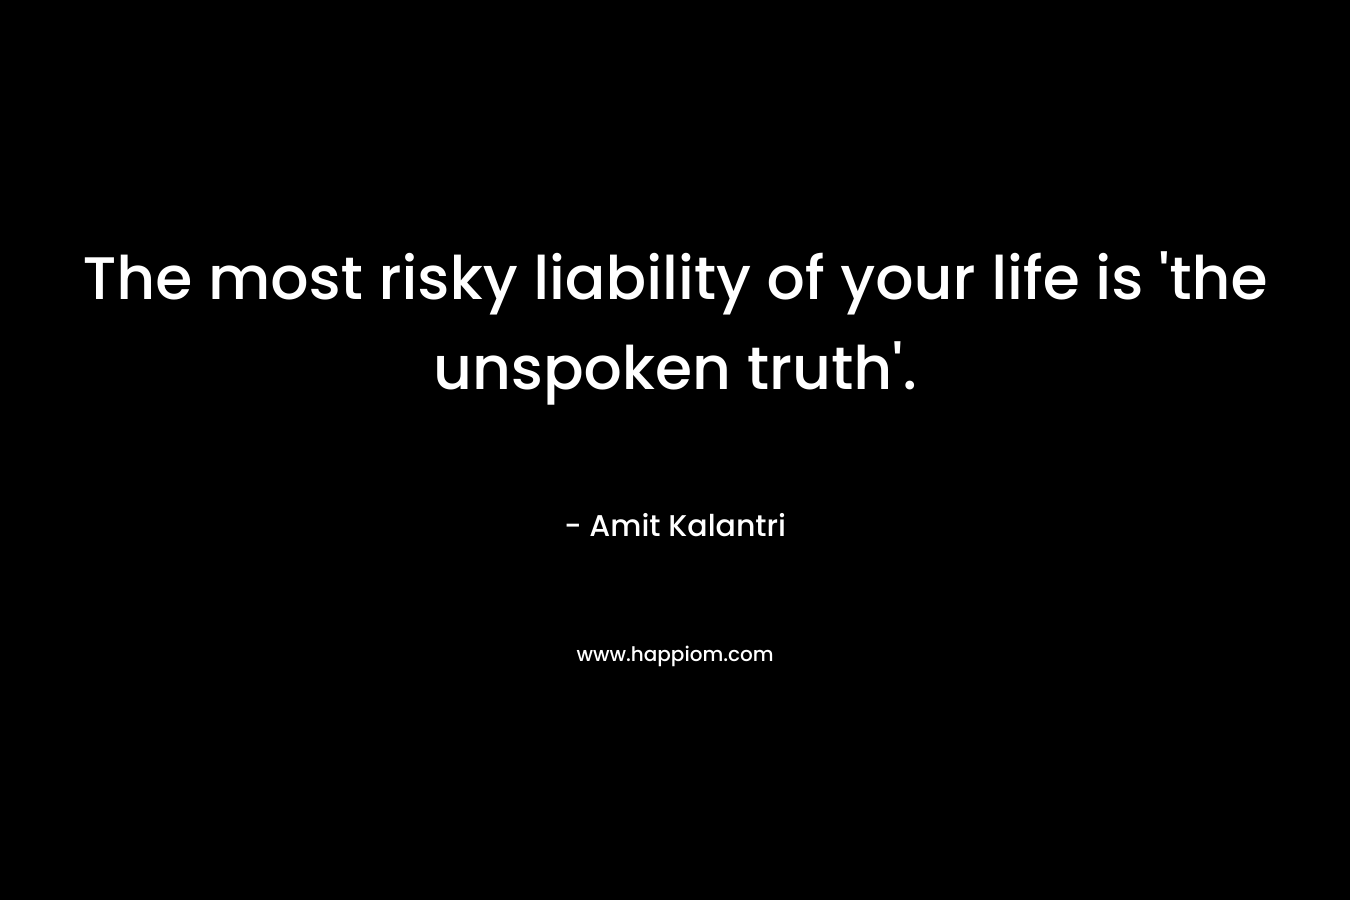 The most risky liability of your life is 'the unspoken truth'.